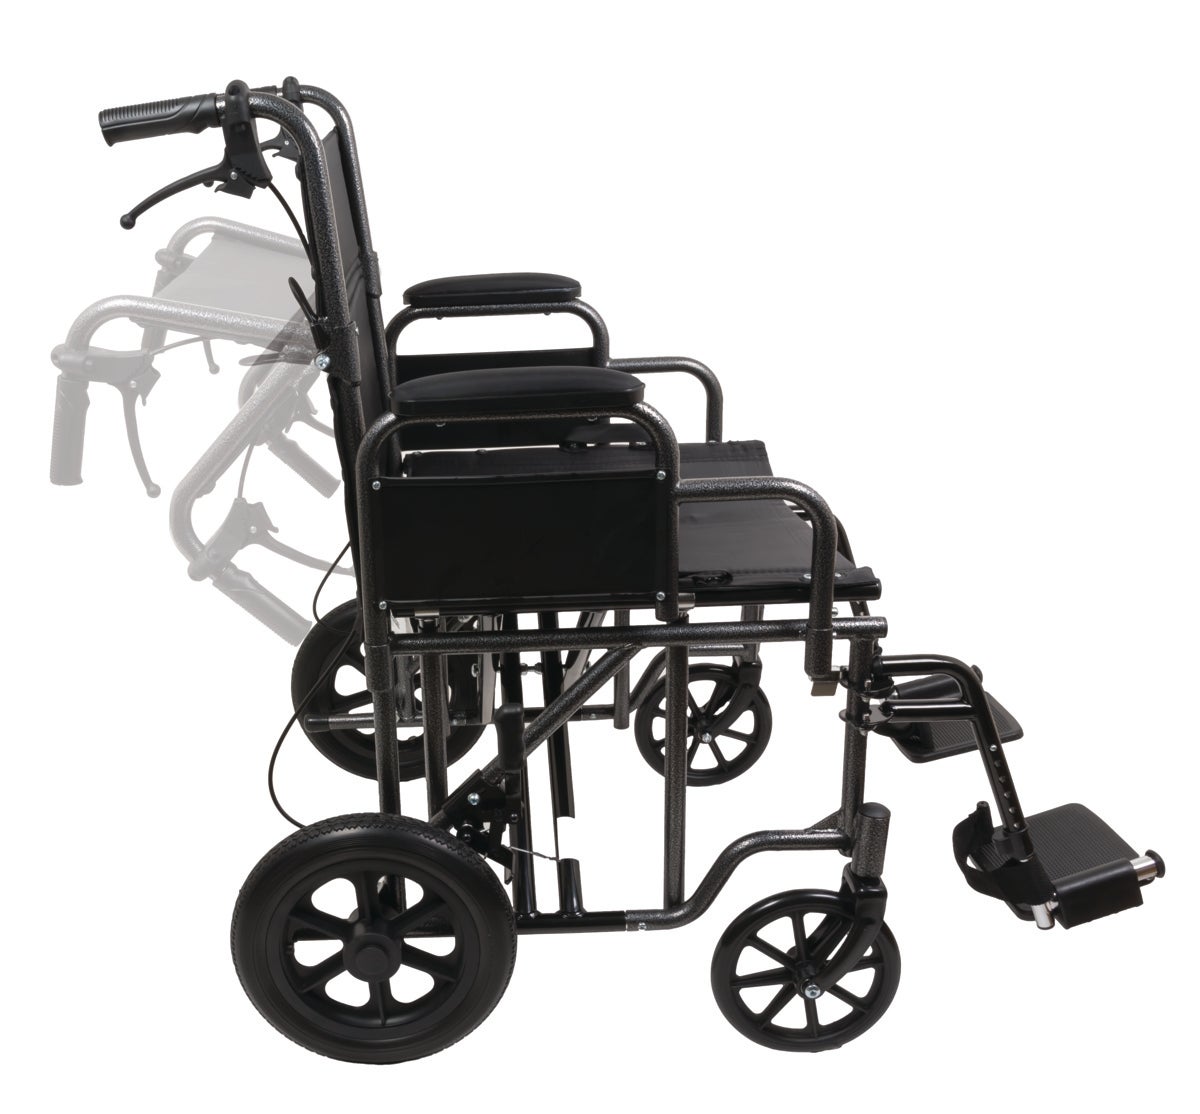 ProBasics Bariatric Transport Chair Front